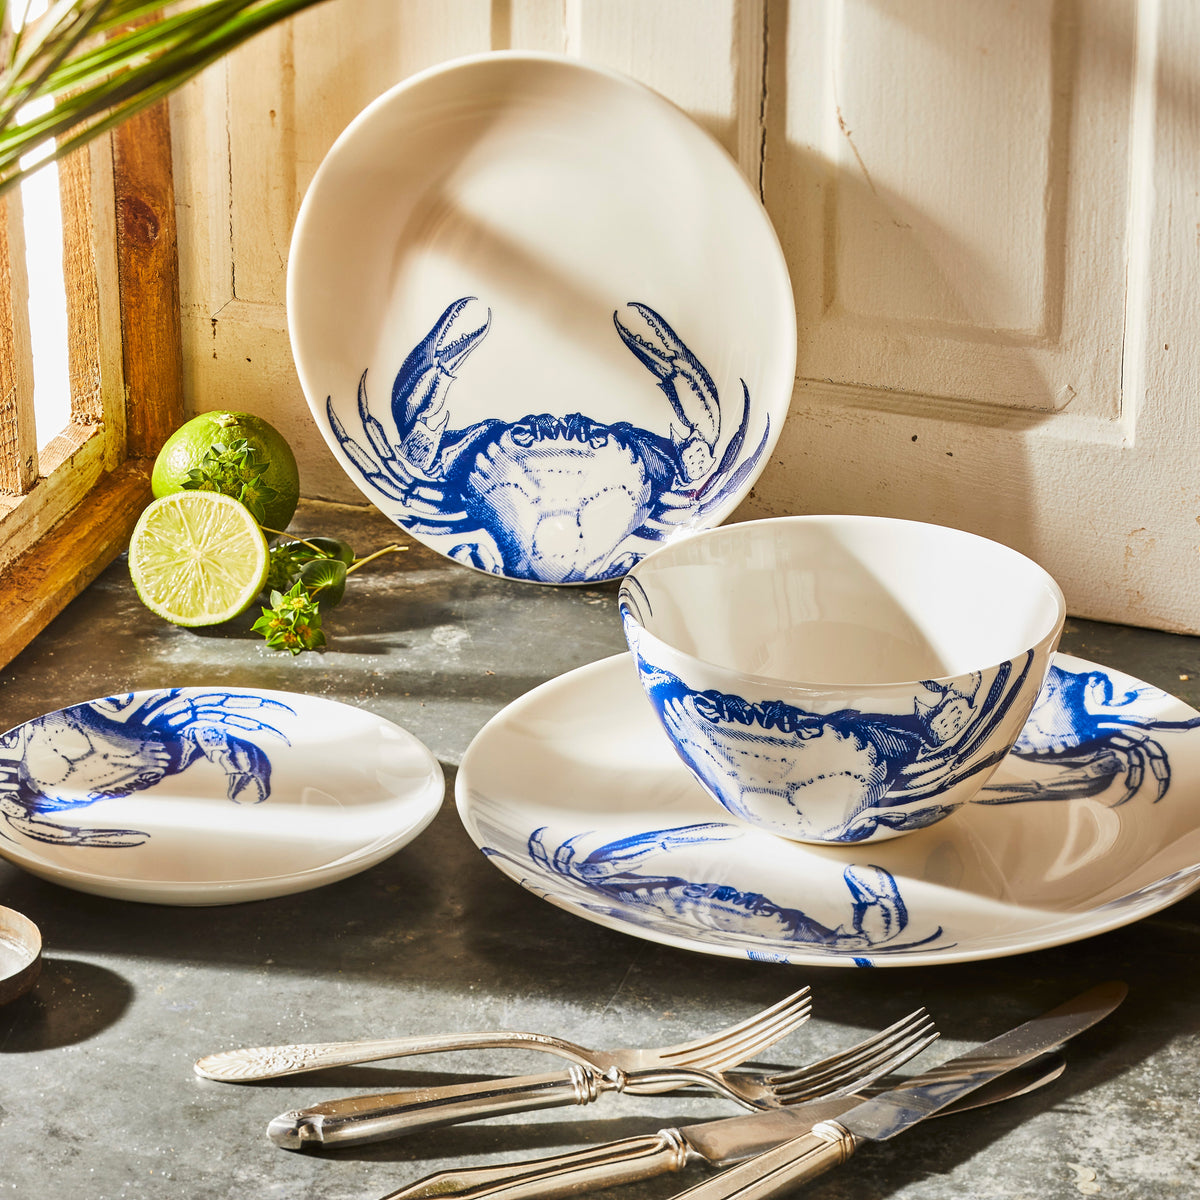 A premium porcelain set of white ceramic dishes with blue crab designs is displayed on a gray surface near a window, accompanied by two limes, a halved lime, and some silverware, including an elegantly crafted **Crab Coupe Salad Plate by Caskata Artisanal Home**.